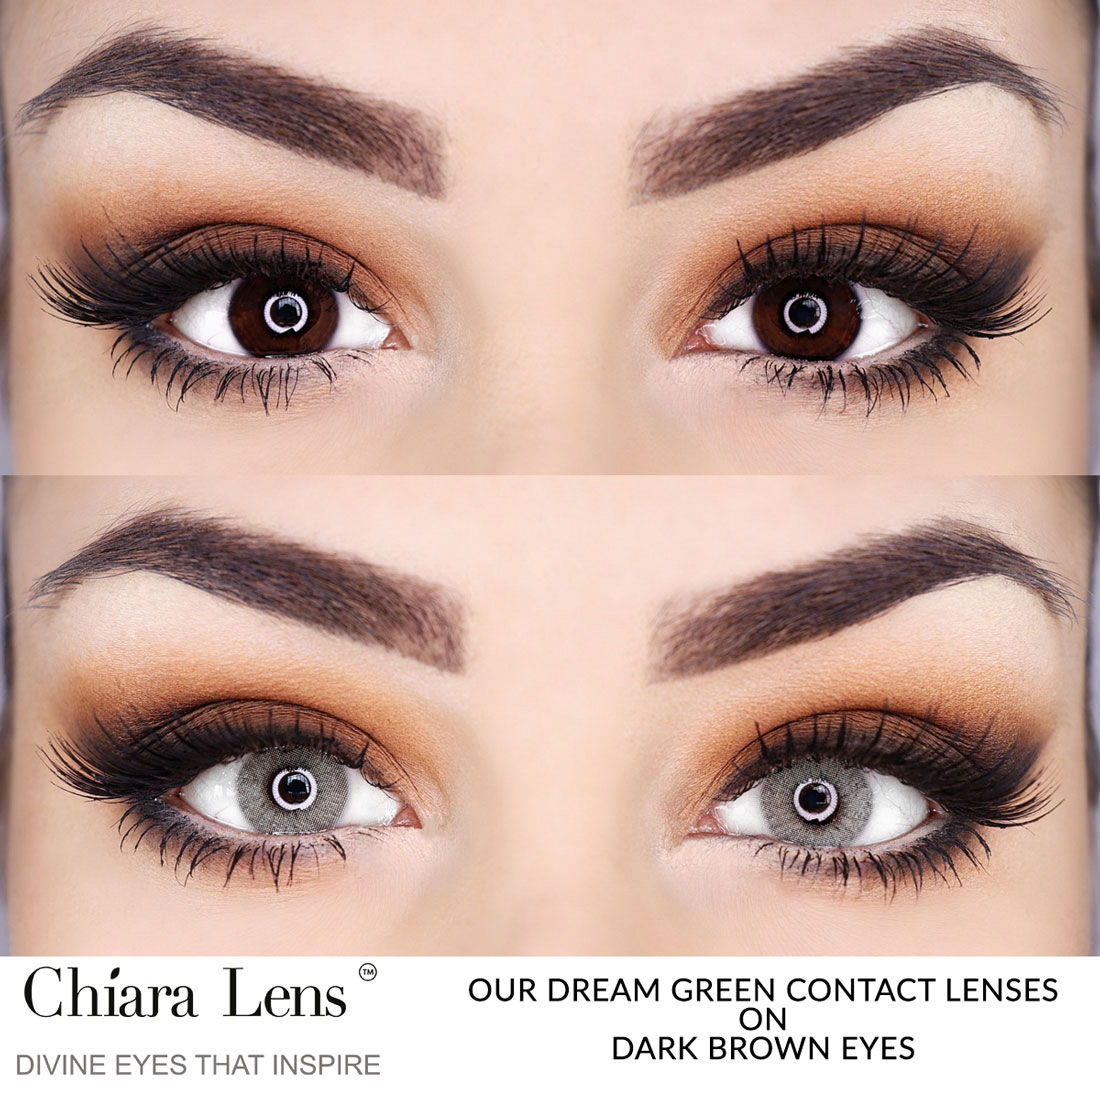 Before And After Green Contact Lenses On Dark Brown Eyes Chiara Lens